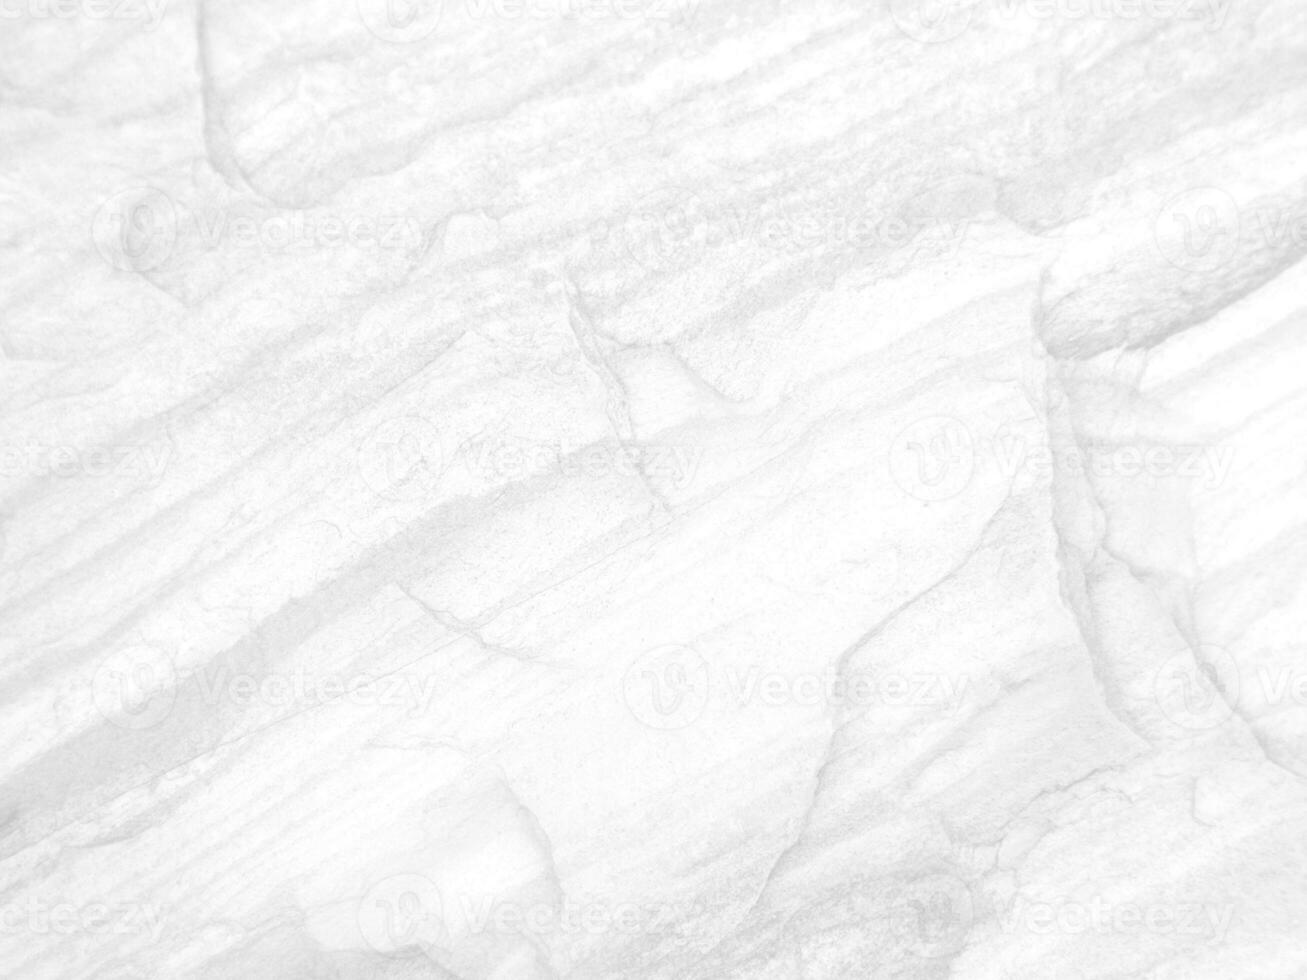 Surface of the White stone texture rough, gray-white tone. Use this for wallpaper or background image. There is a blank space for text. photo